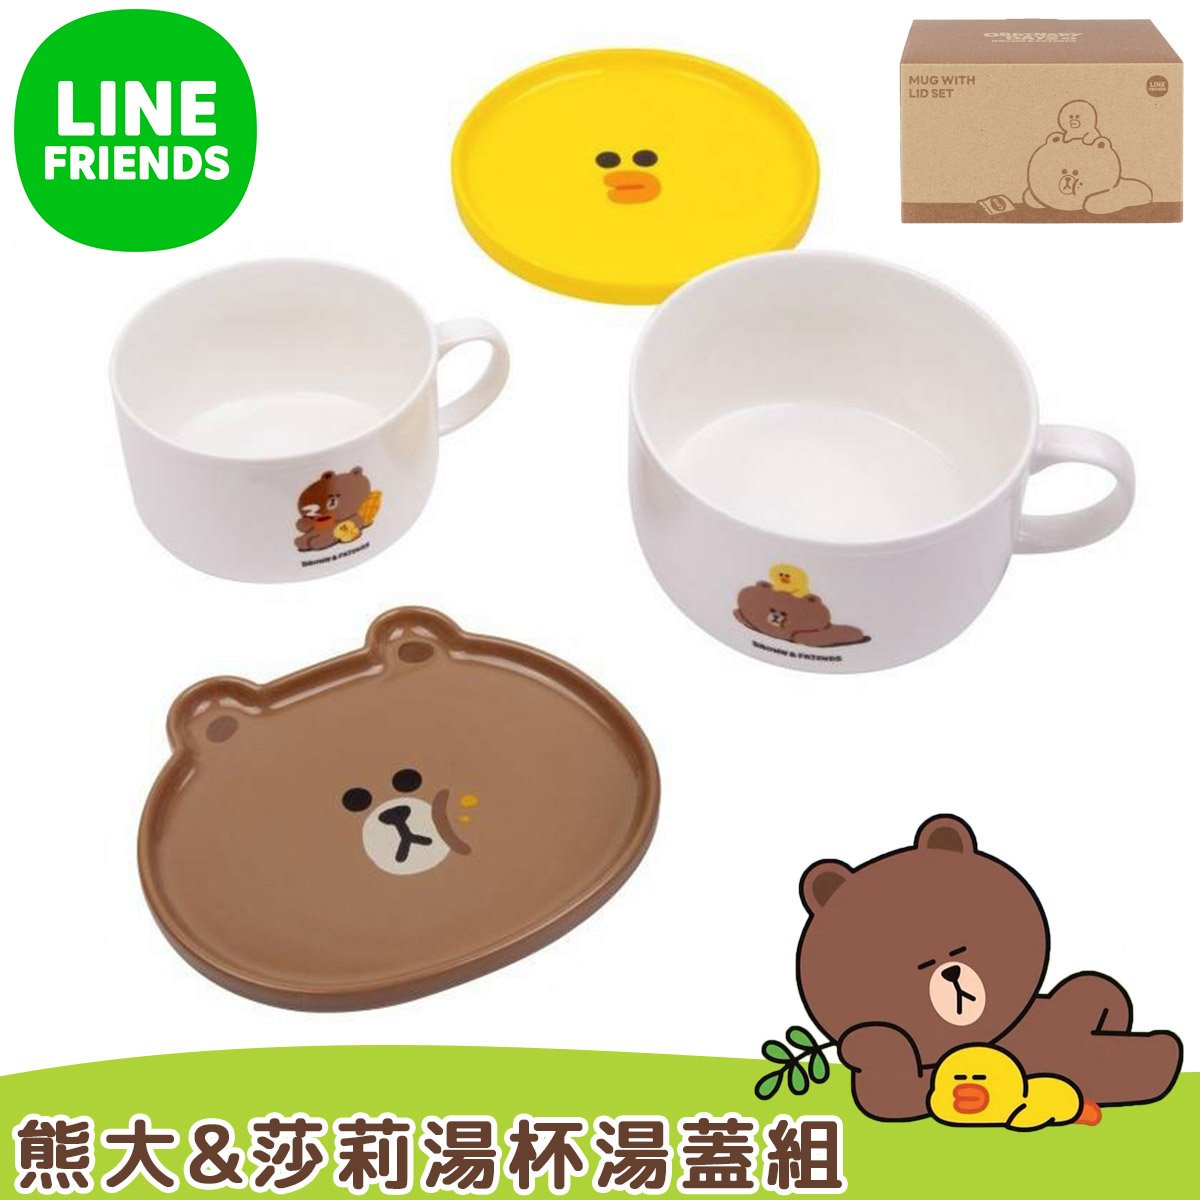 Soup Bowl Set - Line Friends Brown / Sally (Taiwan Edition)